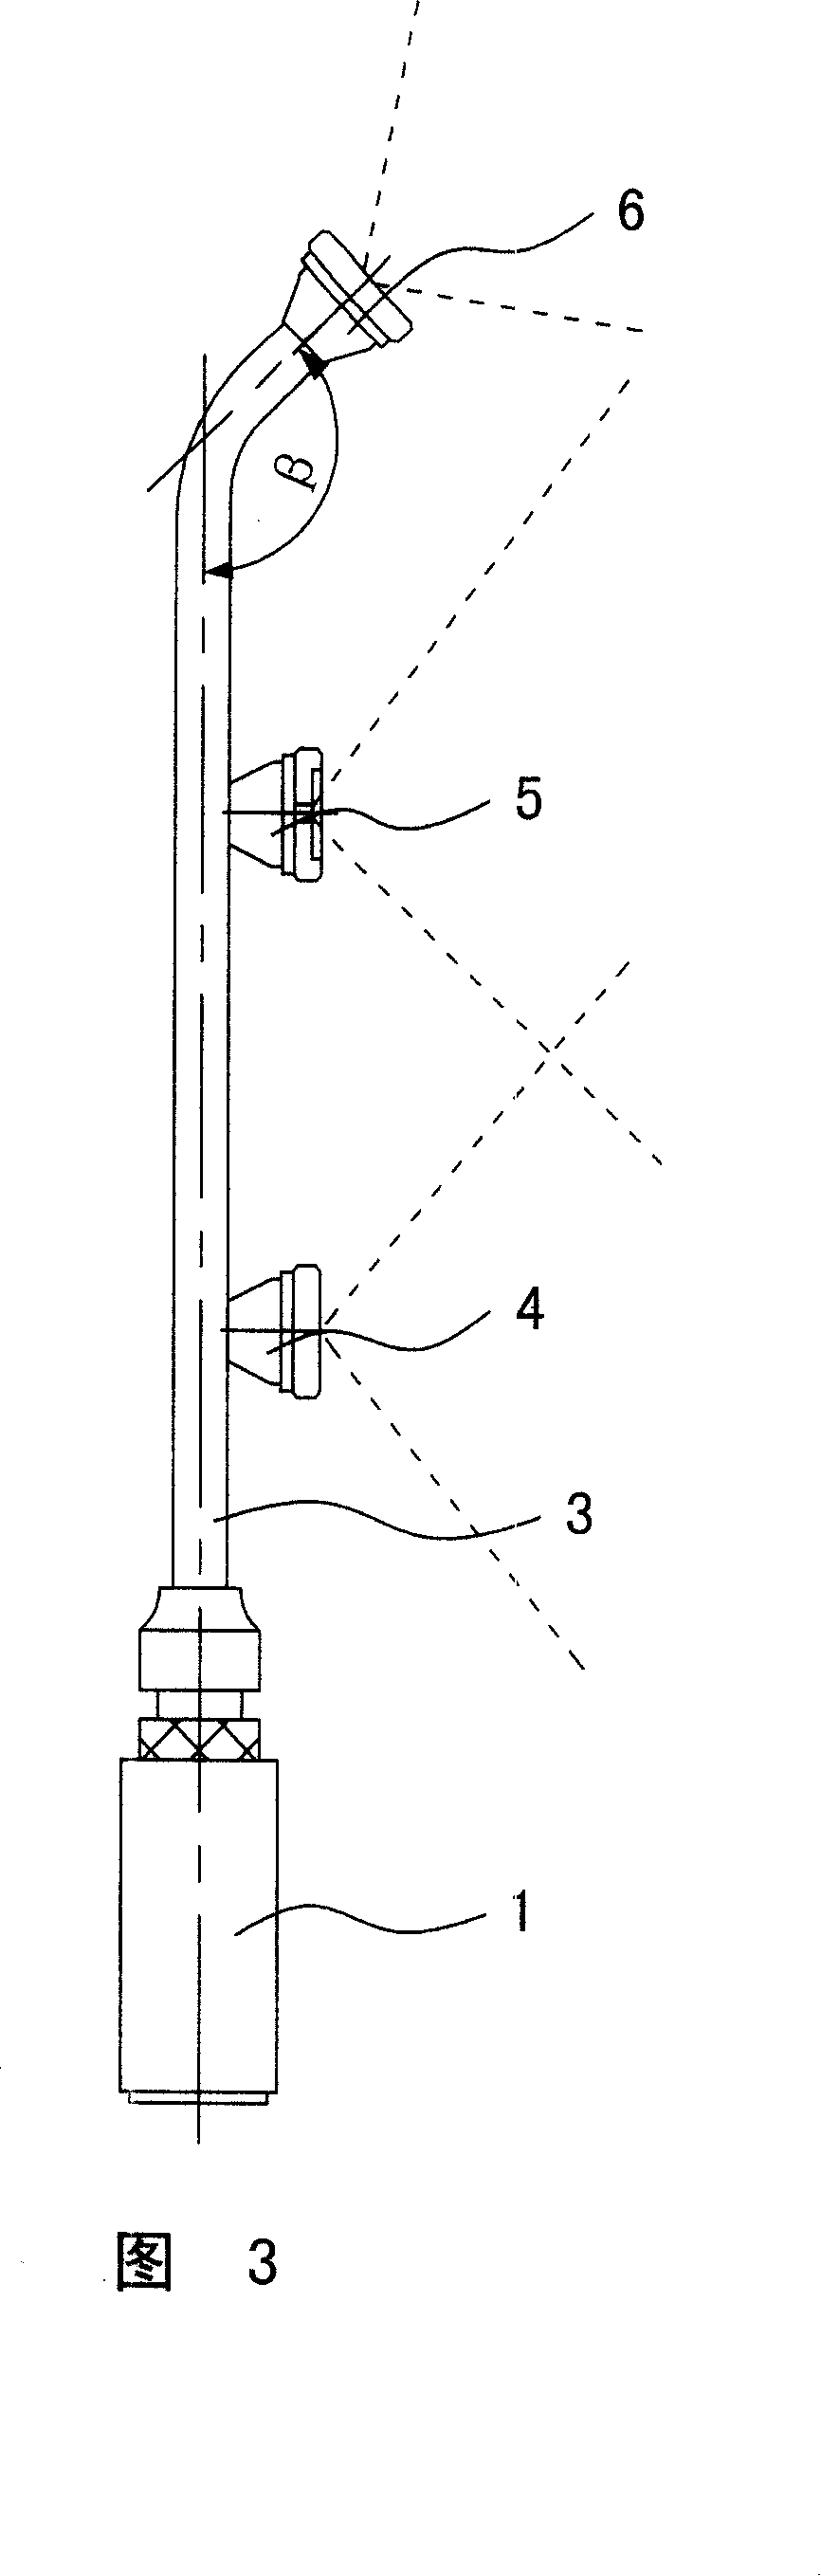 Multiple-nozzle chips connected in series multiple-segment spray lance of the vaporizer